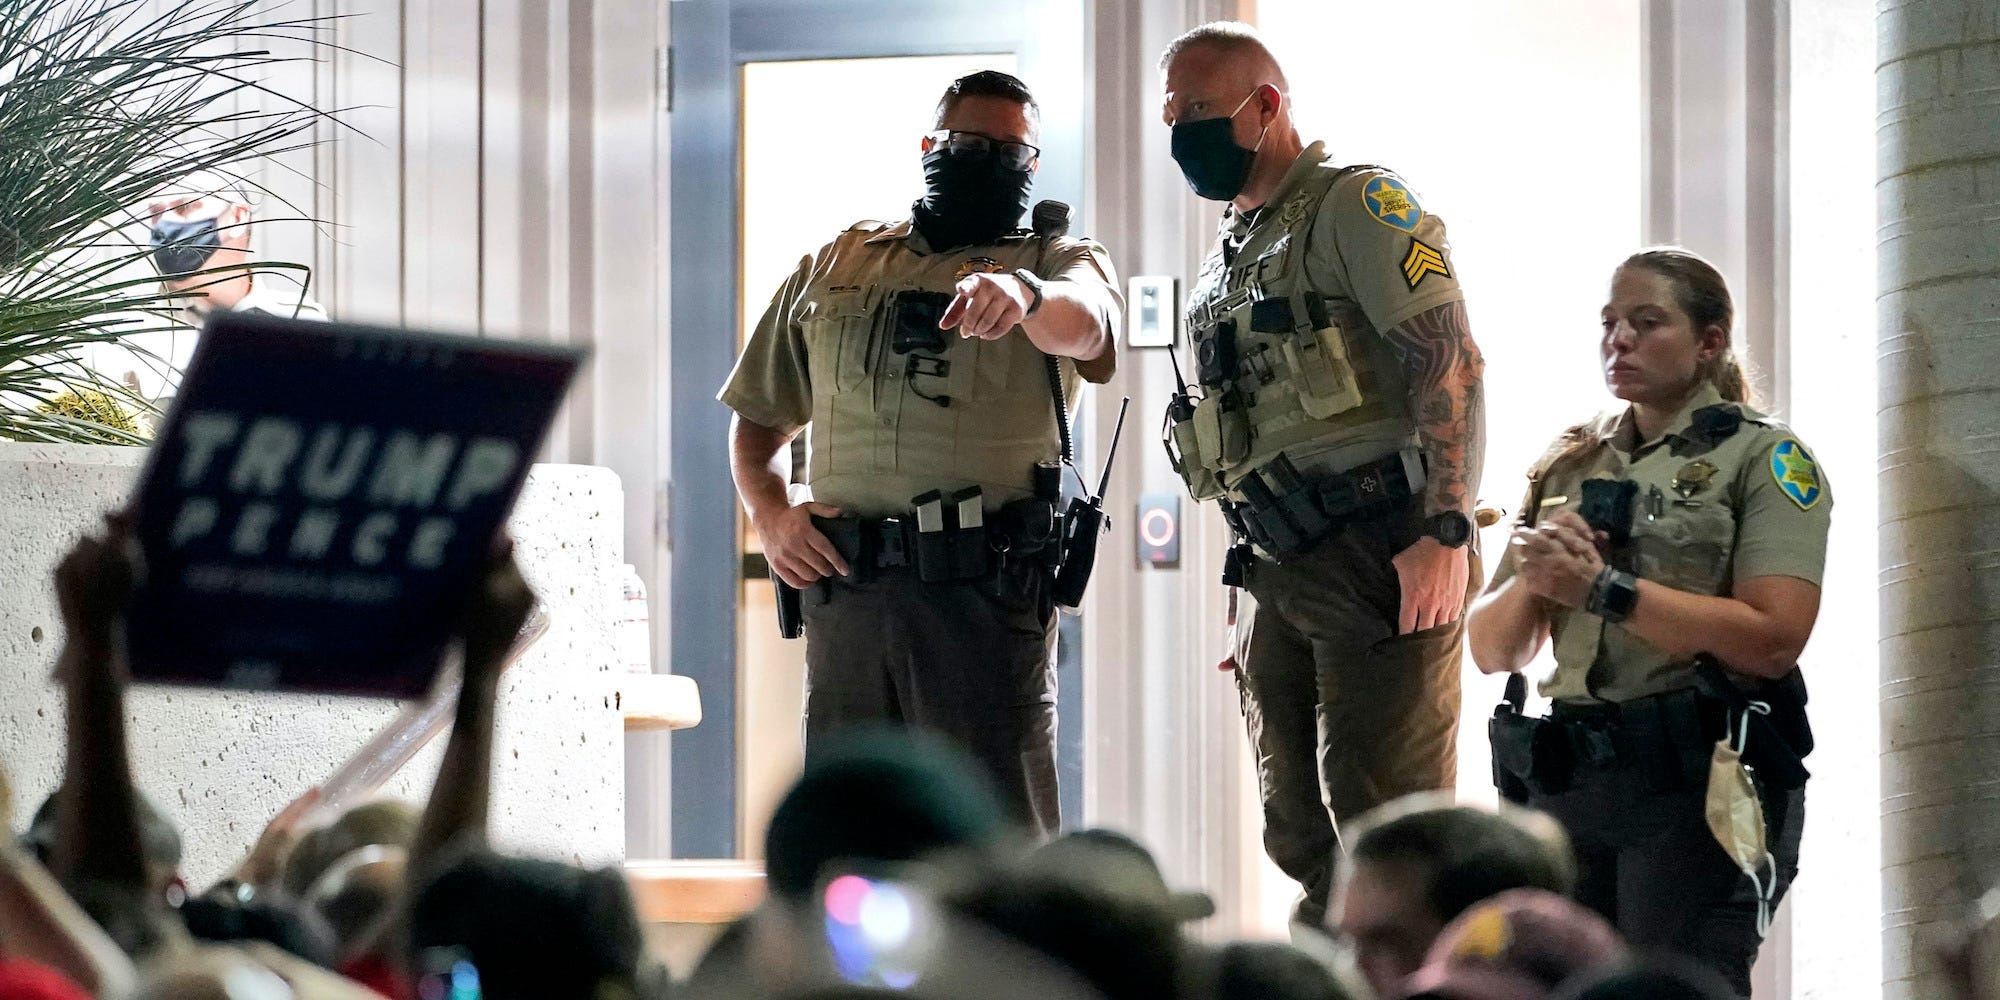 Maricopa County Sheriff's Deputies stand at the door of the Maricopa County Recorder's Office